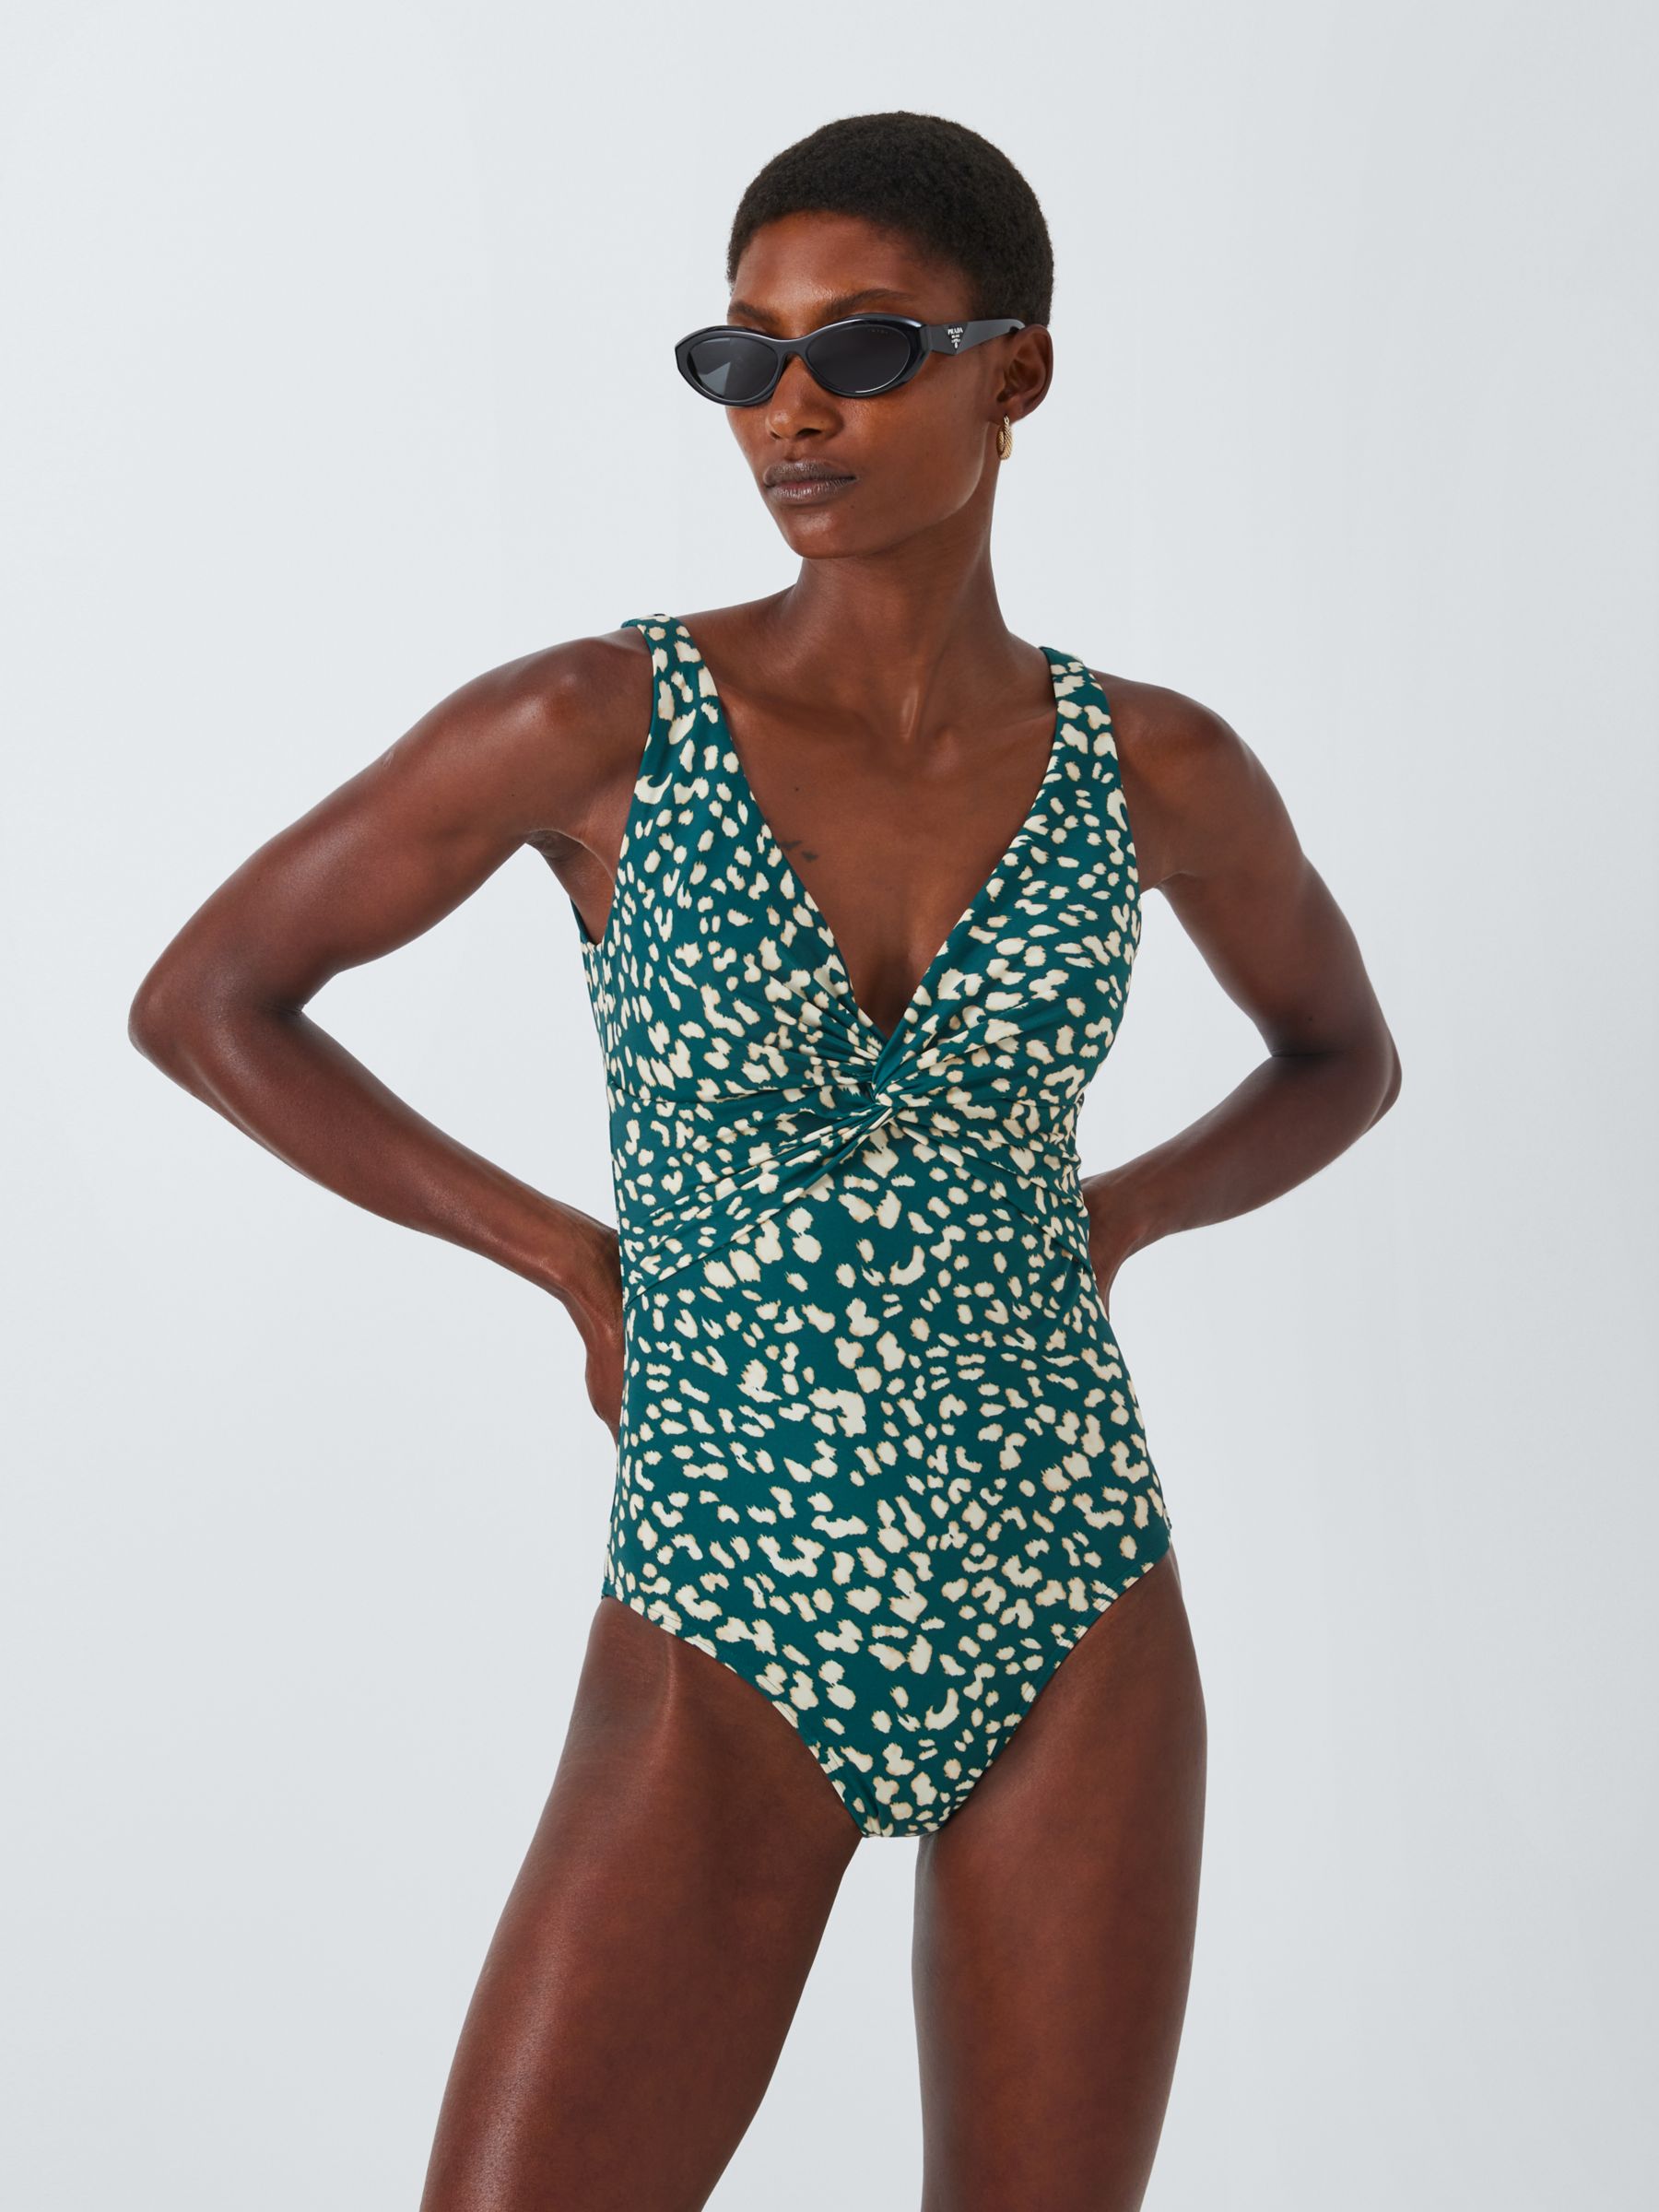 Panos Emporio Thyme Sienna High Cut Swimsuit – Luxe Leopard